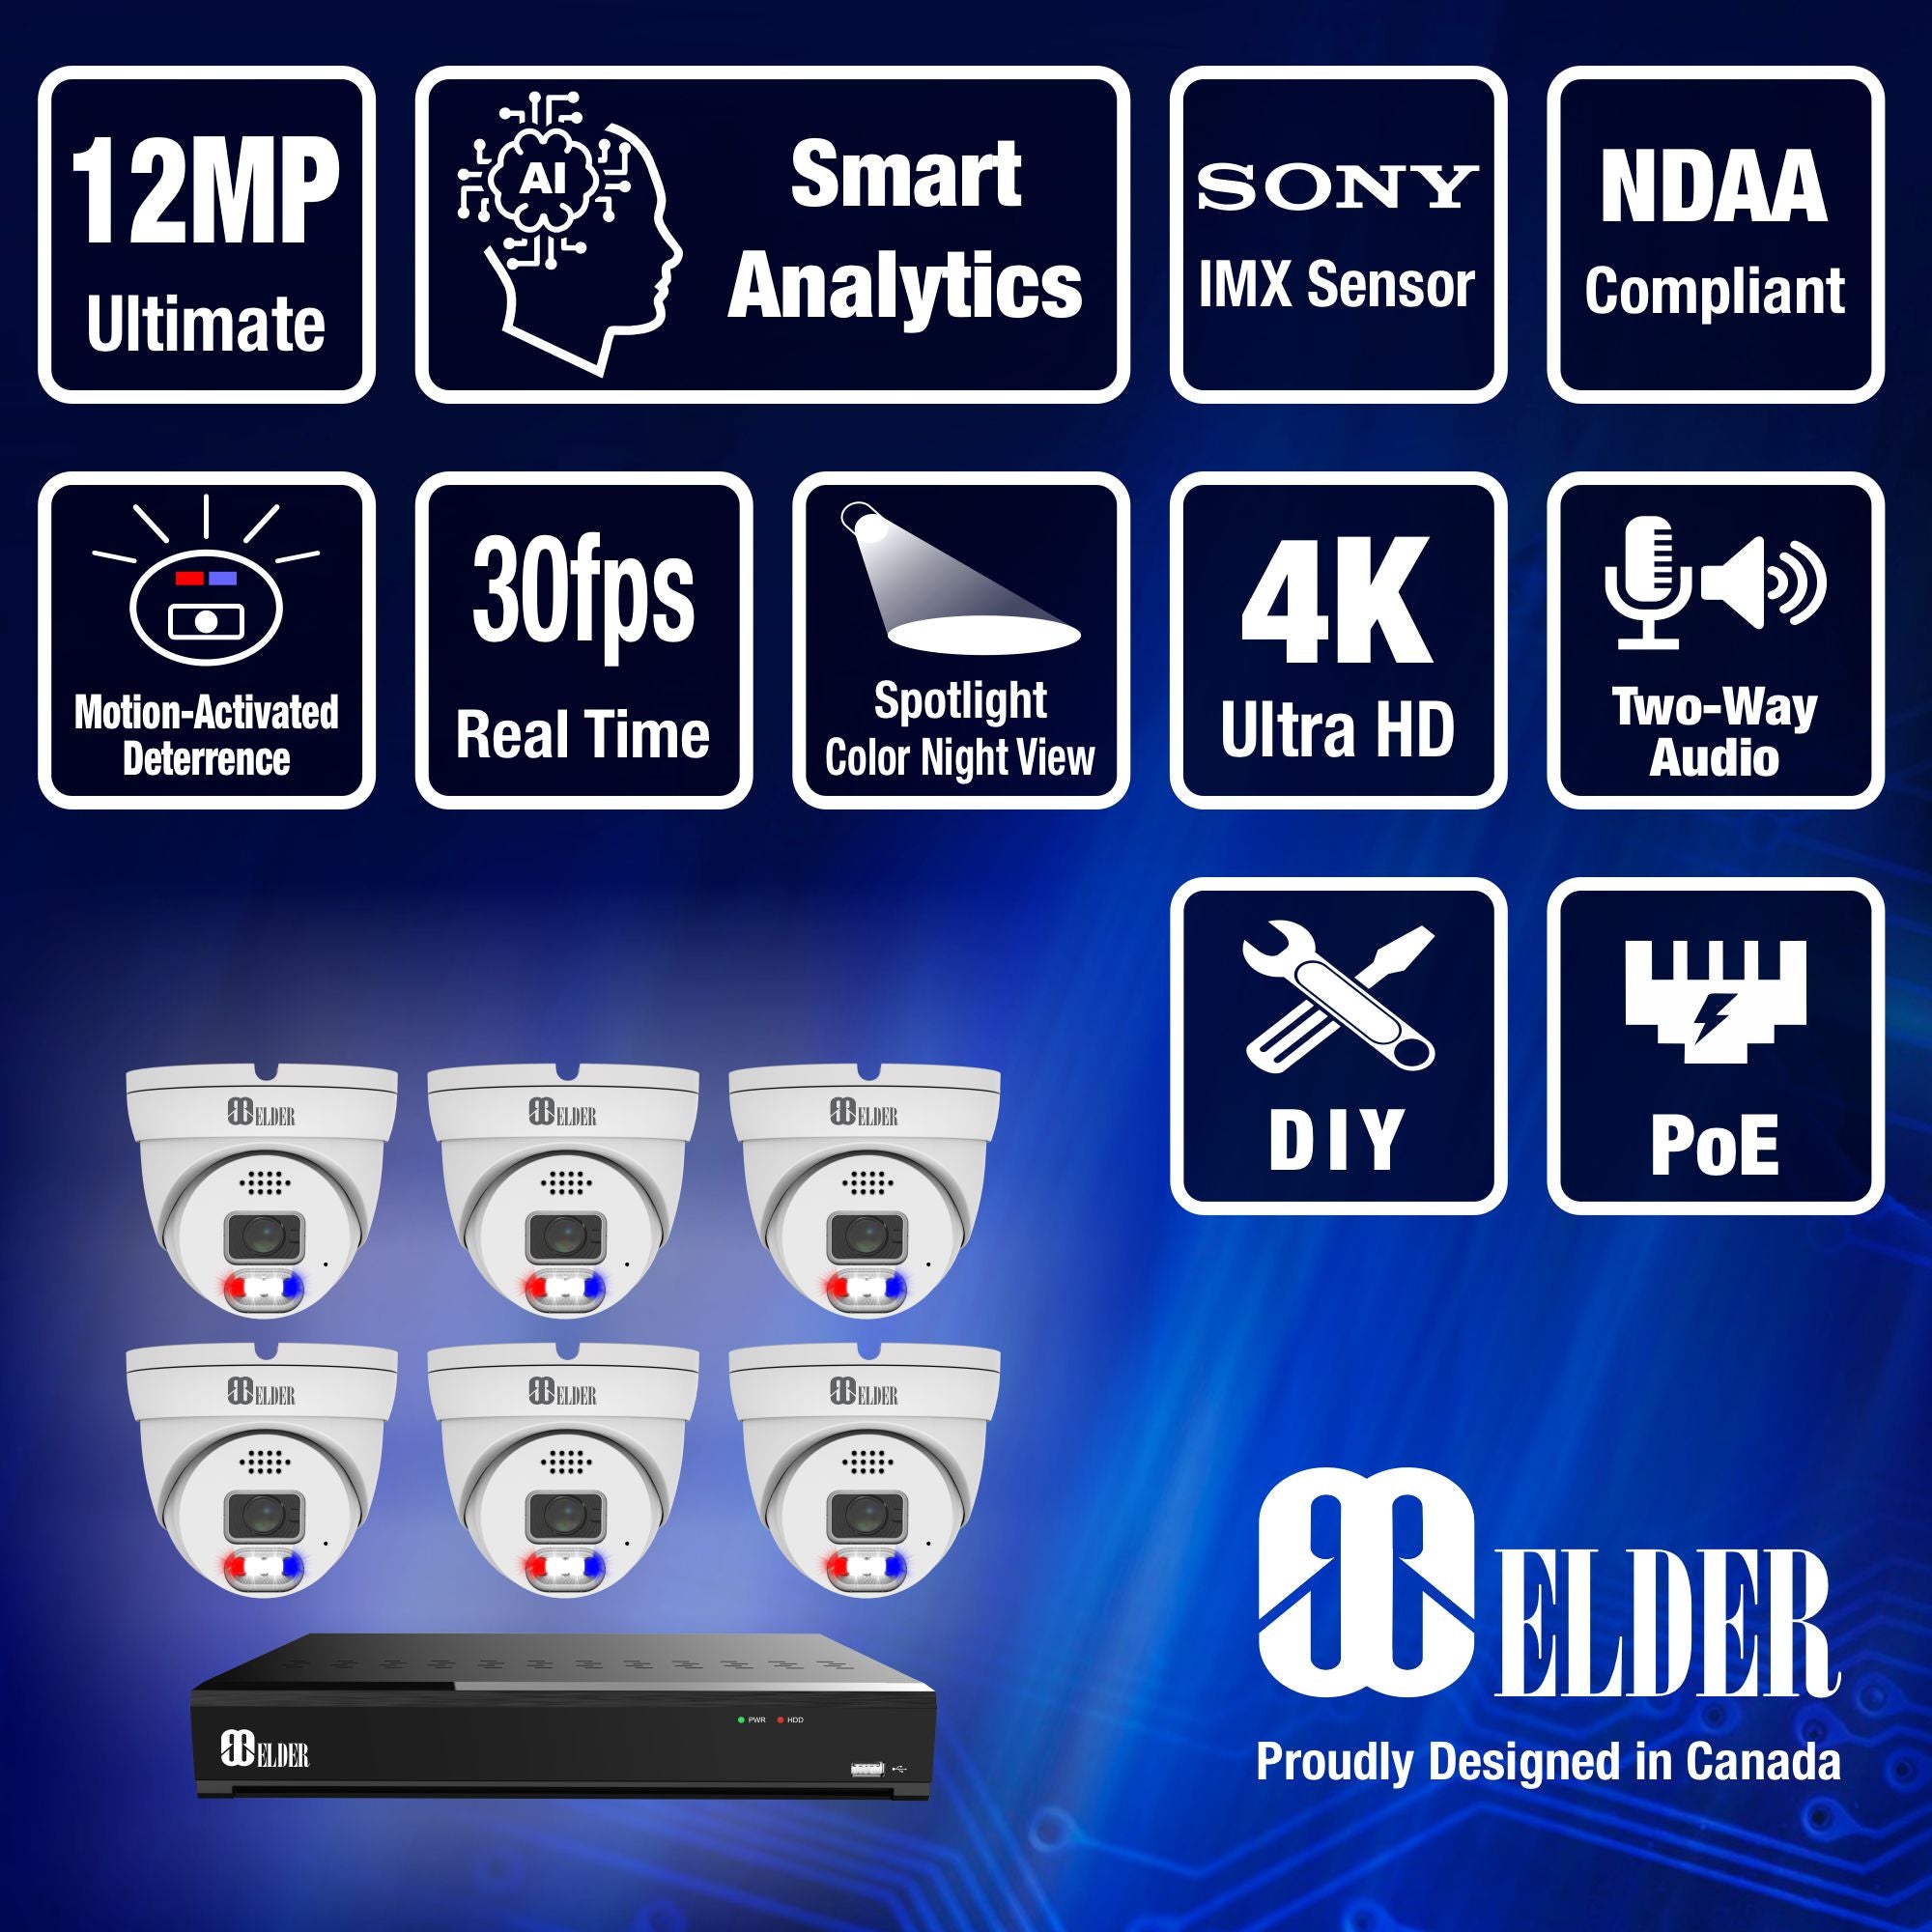 NVR Security Camera System Color Night Vision from Elder Nocturnal Surveillance Camera System Series